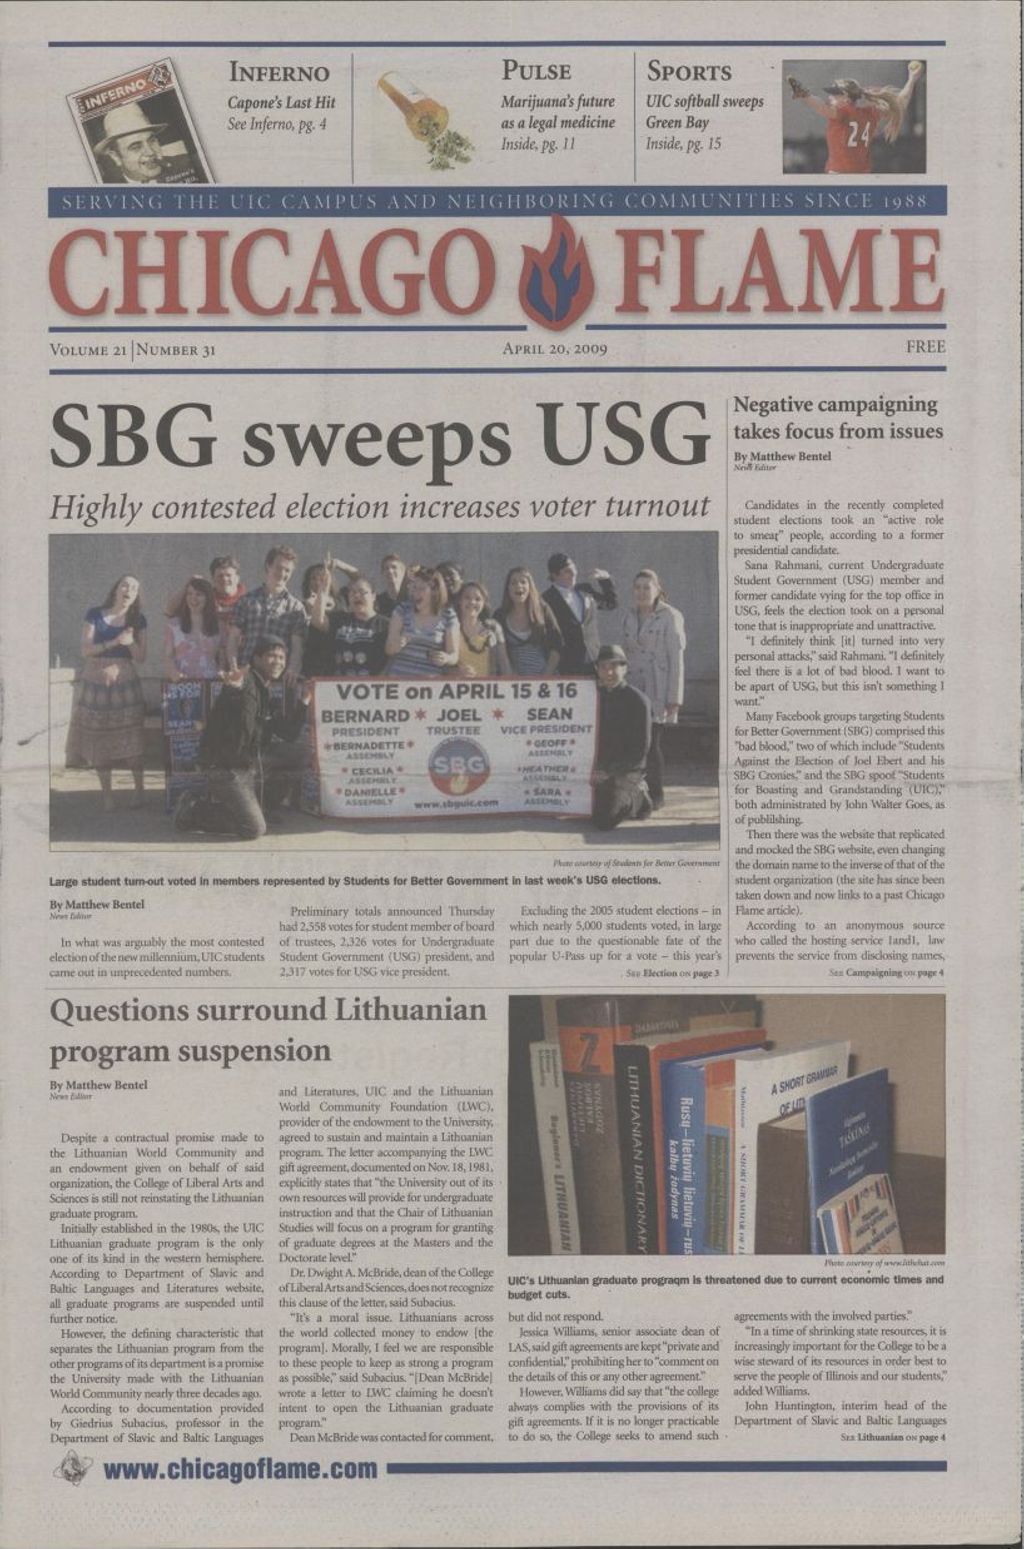 Chicago Flame (April 20, 2009)